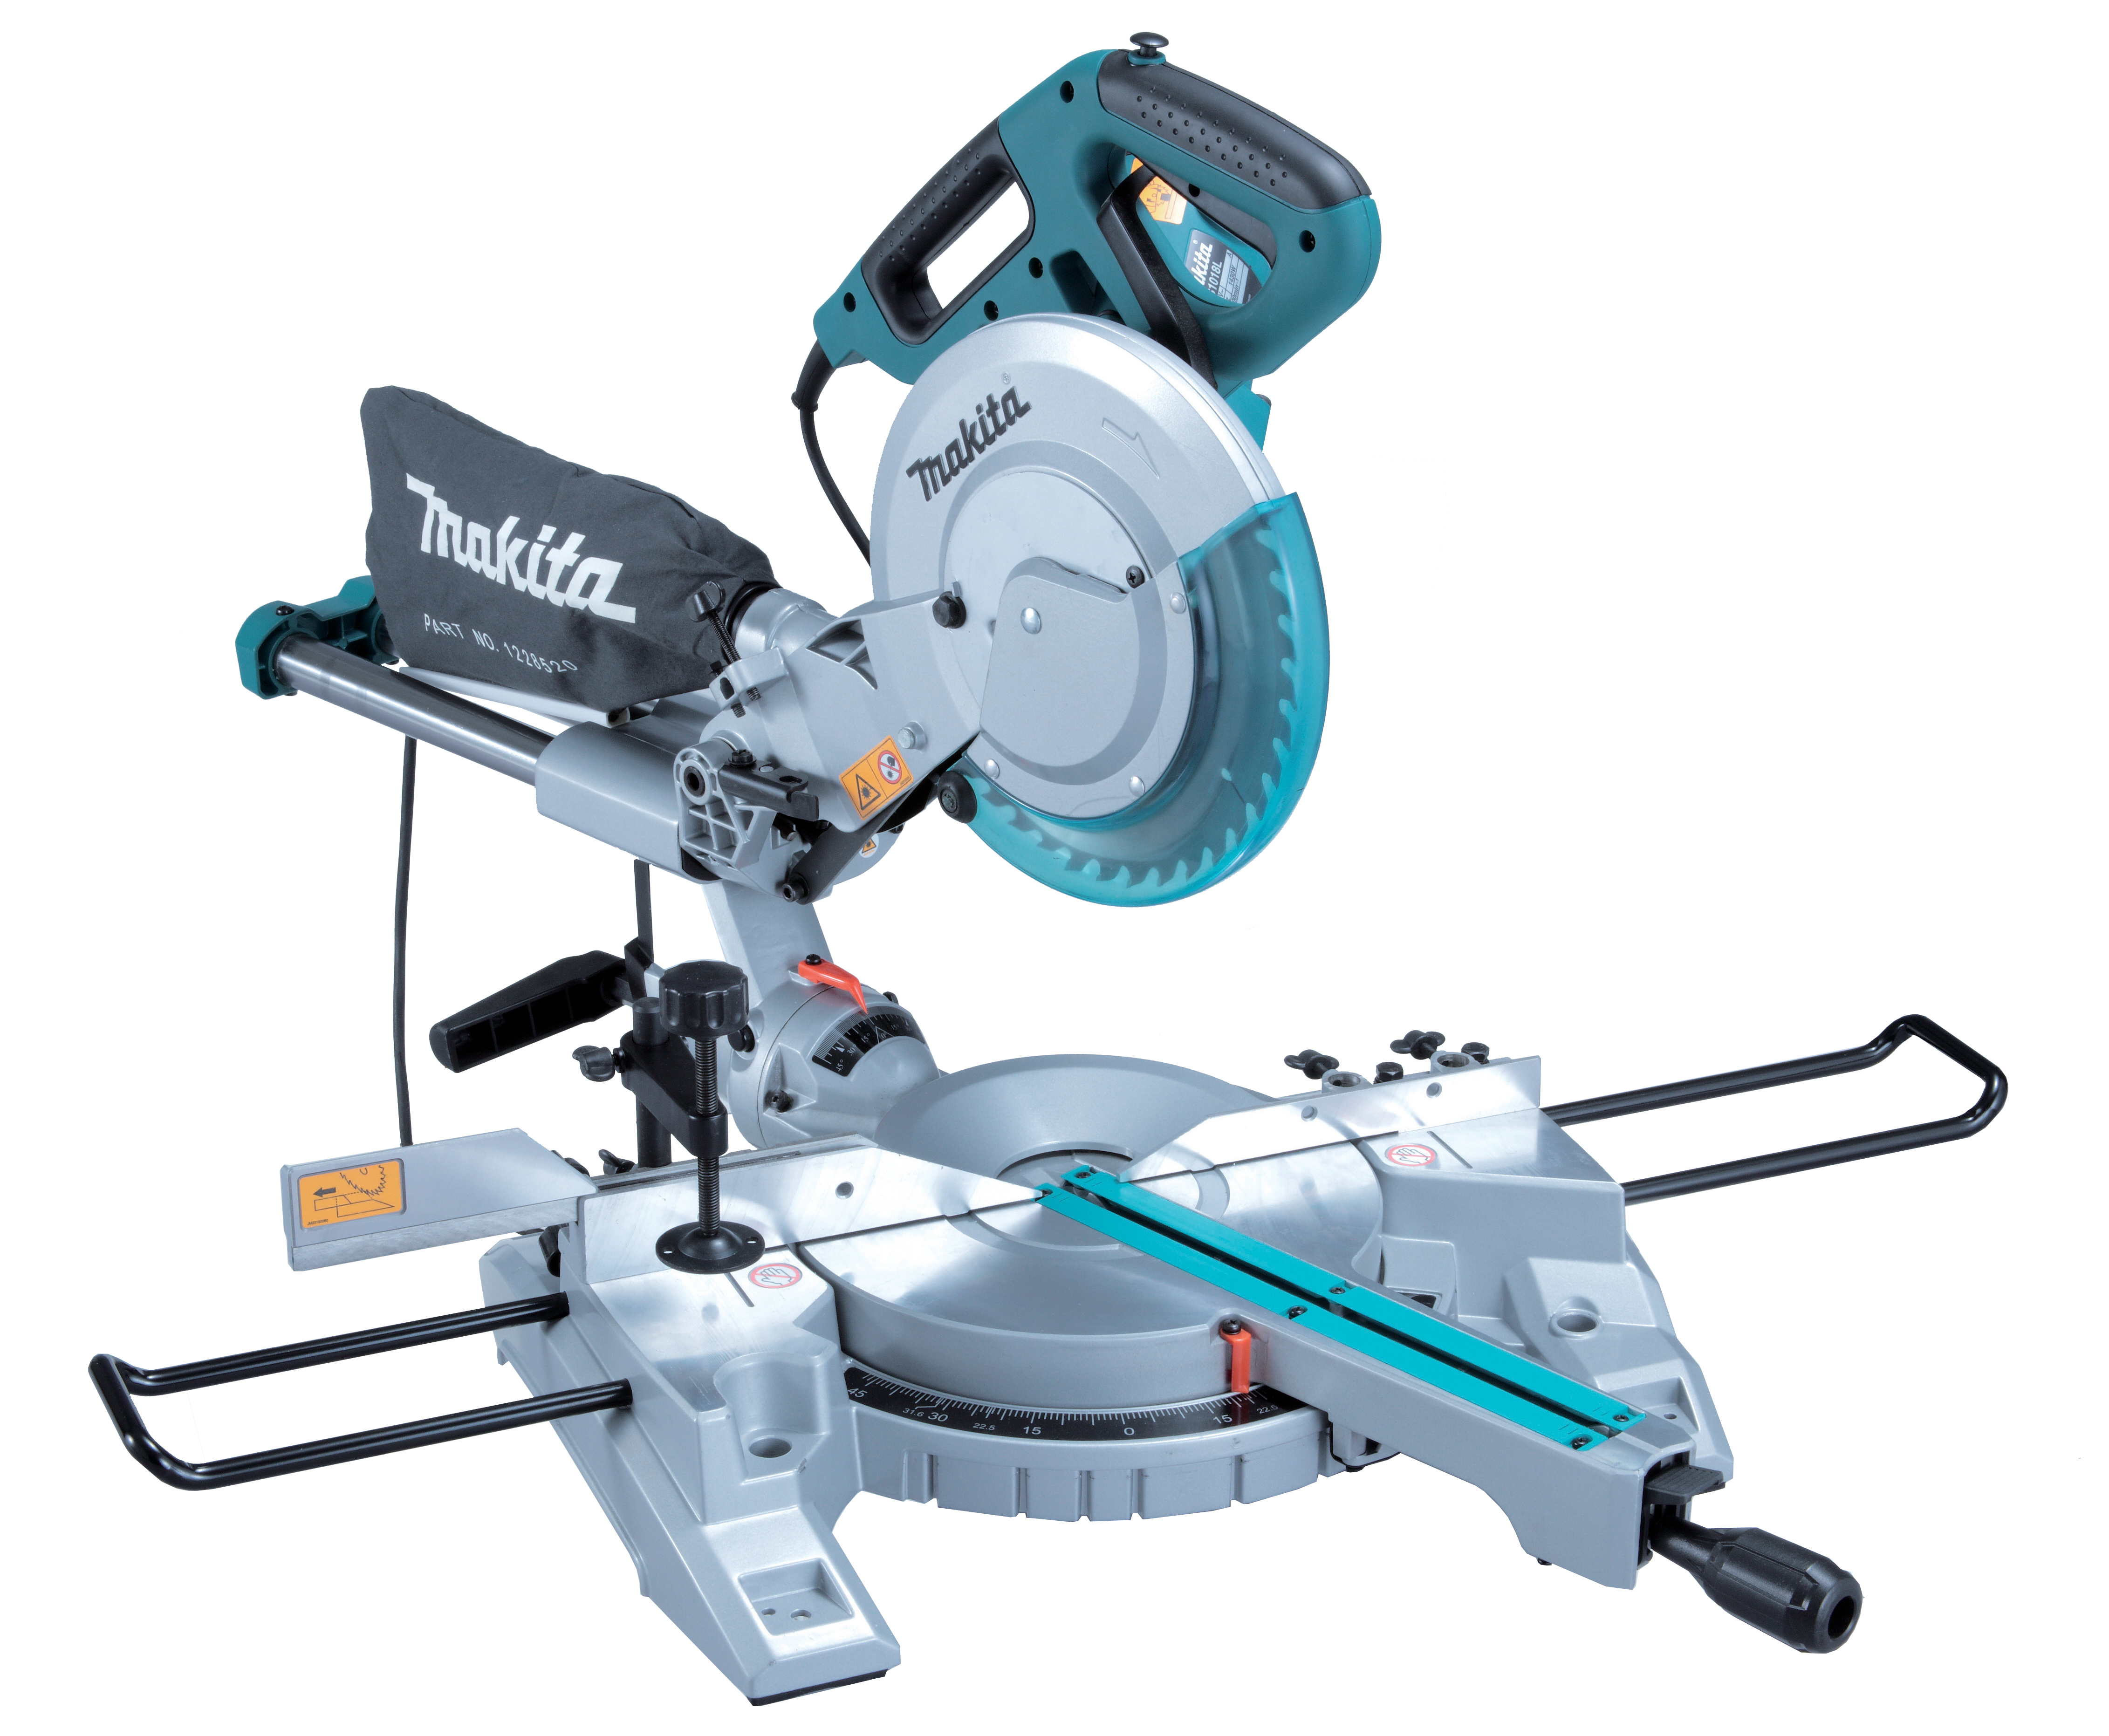 Makita Power Tools South Africa - Compound Mitre Saw LS1018L